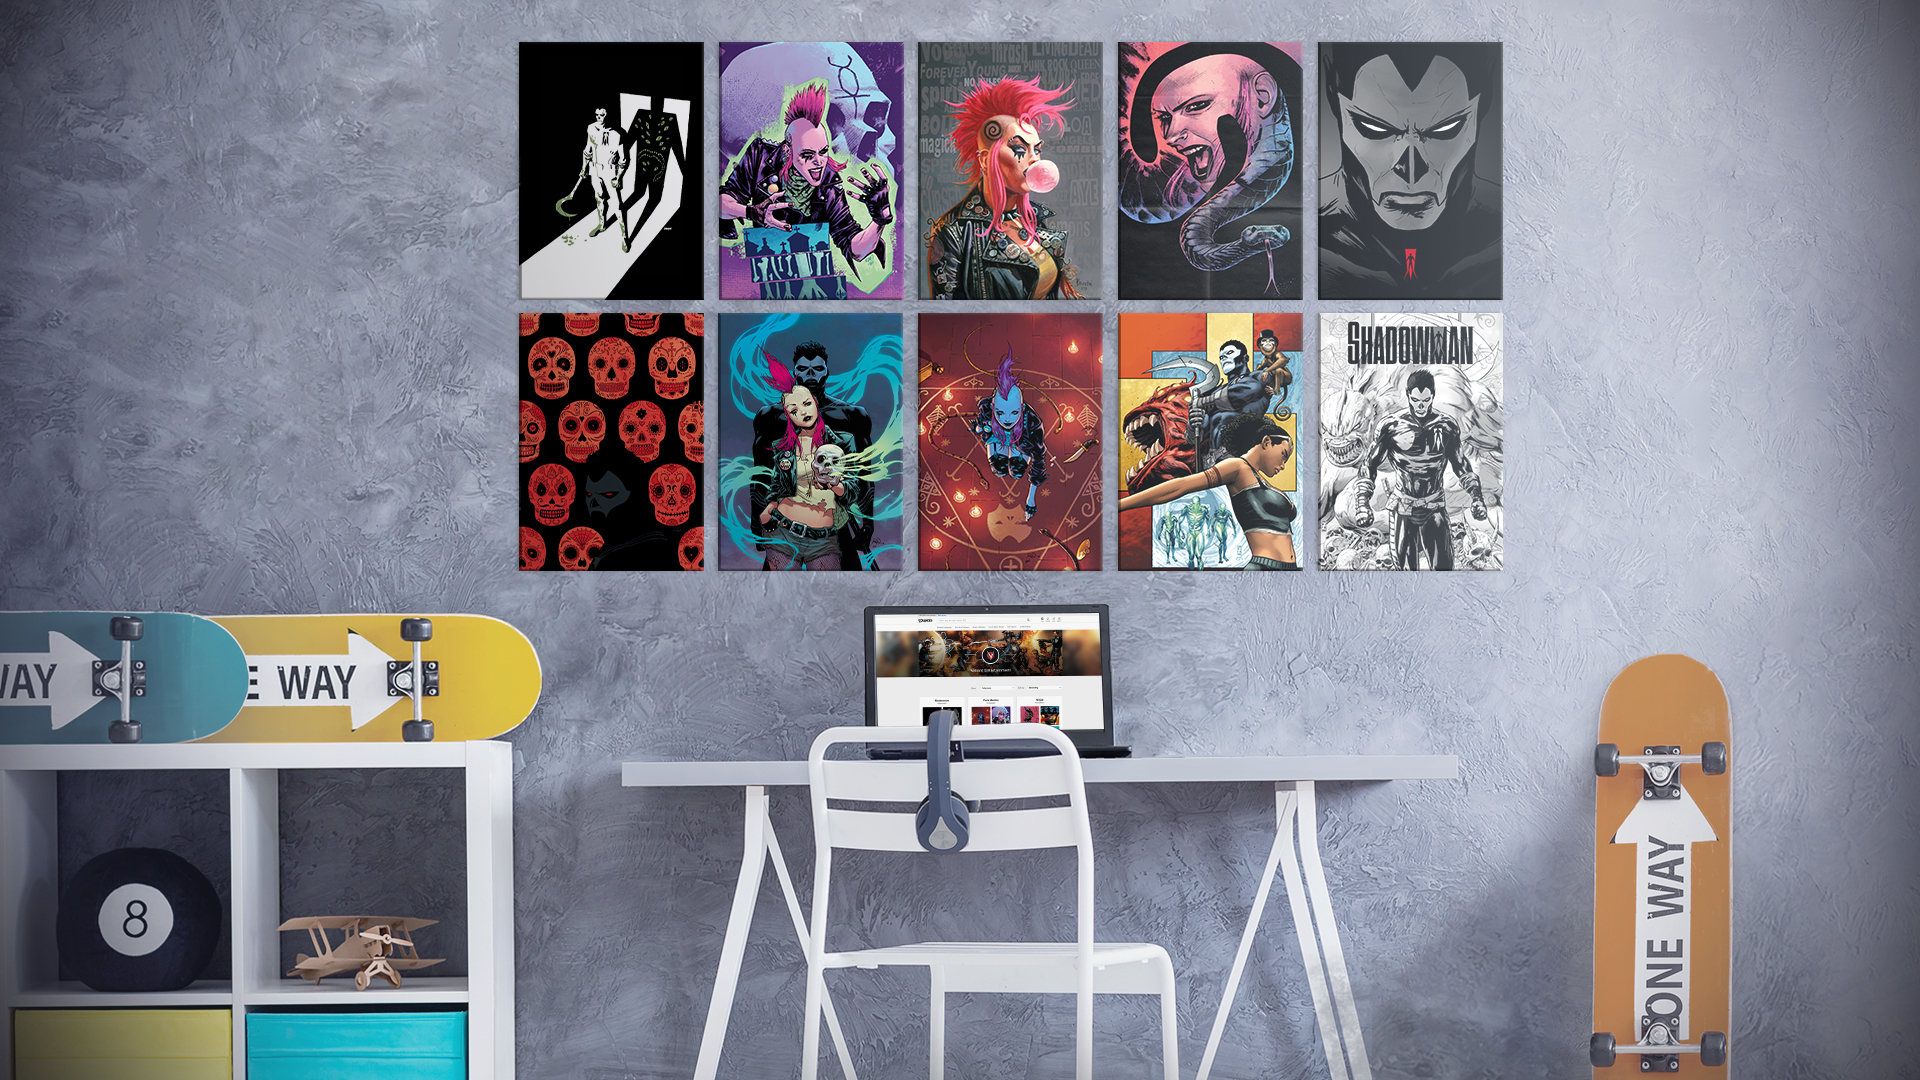 Valiant Partners with Displate to Unleash Stunning Metal Posters